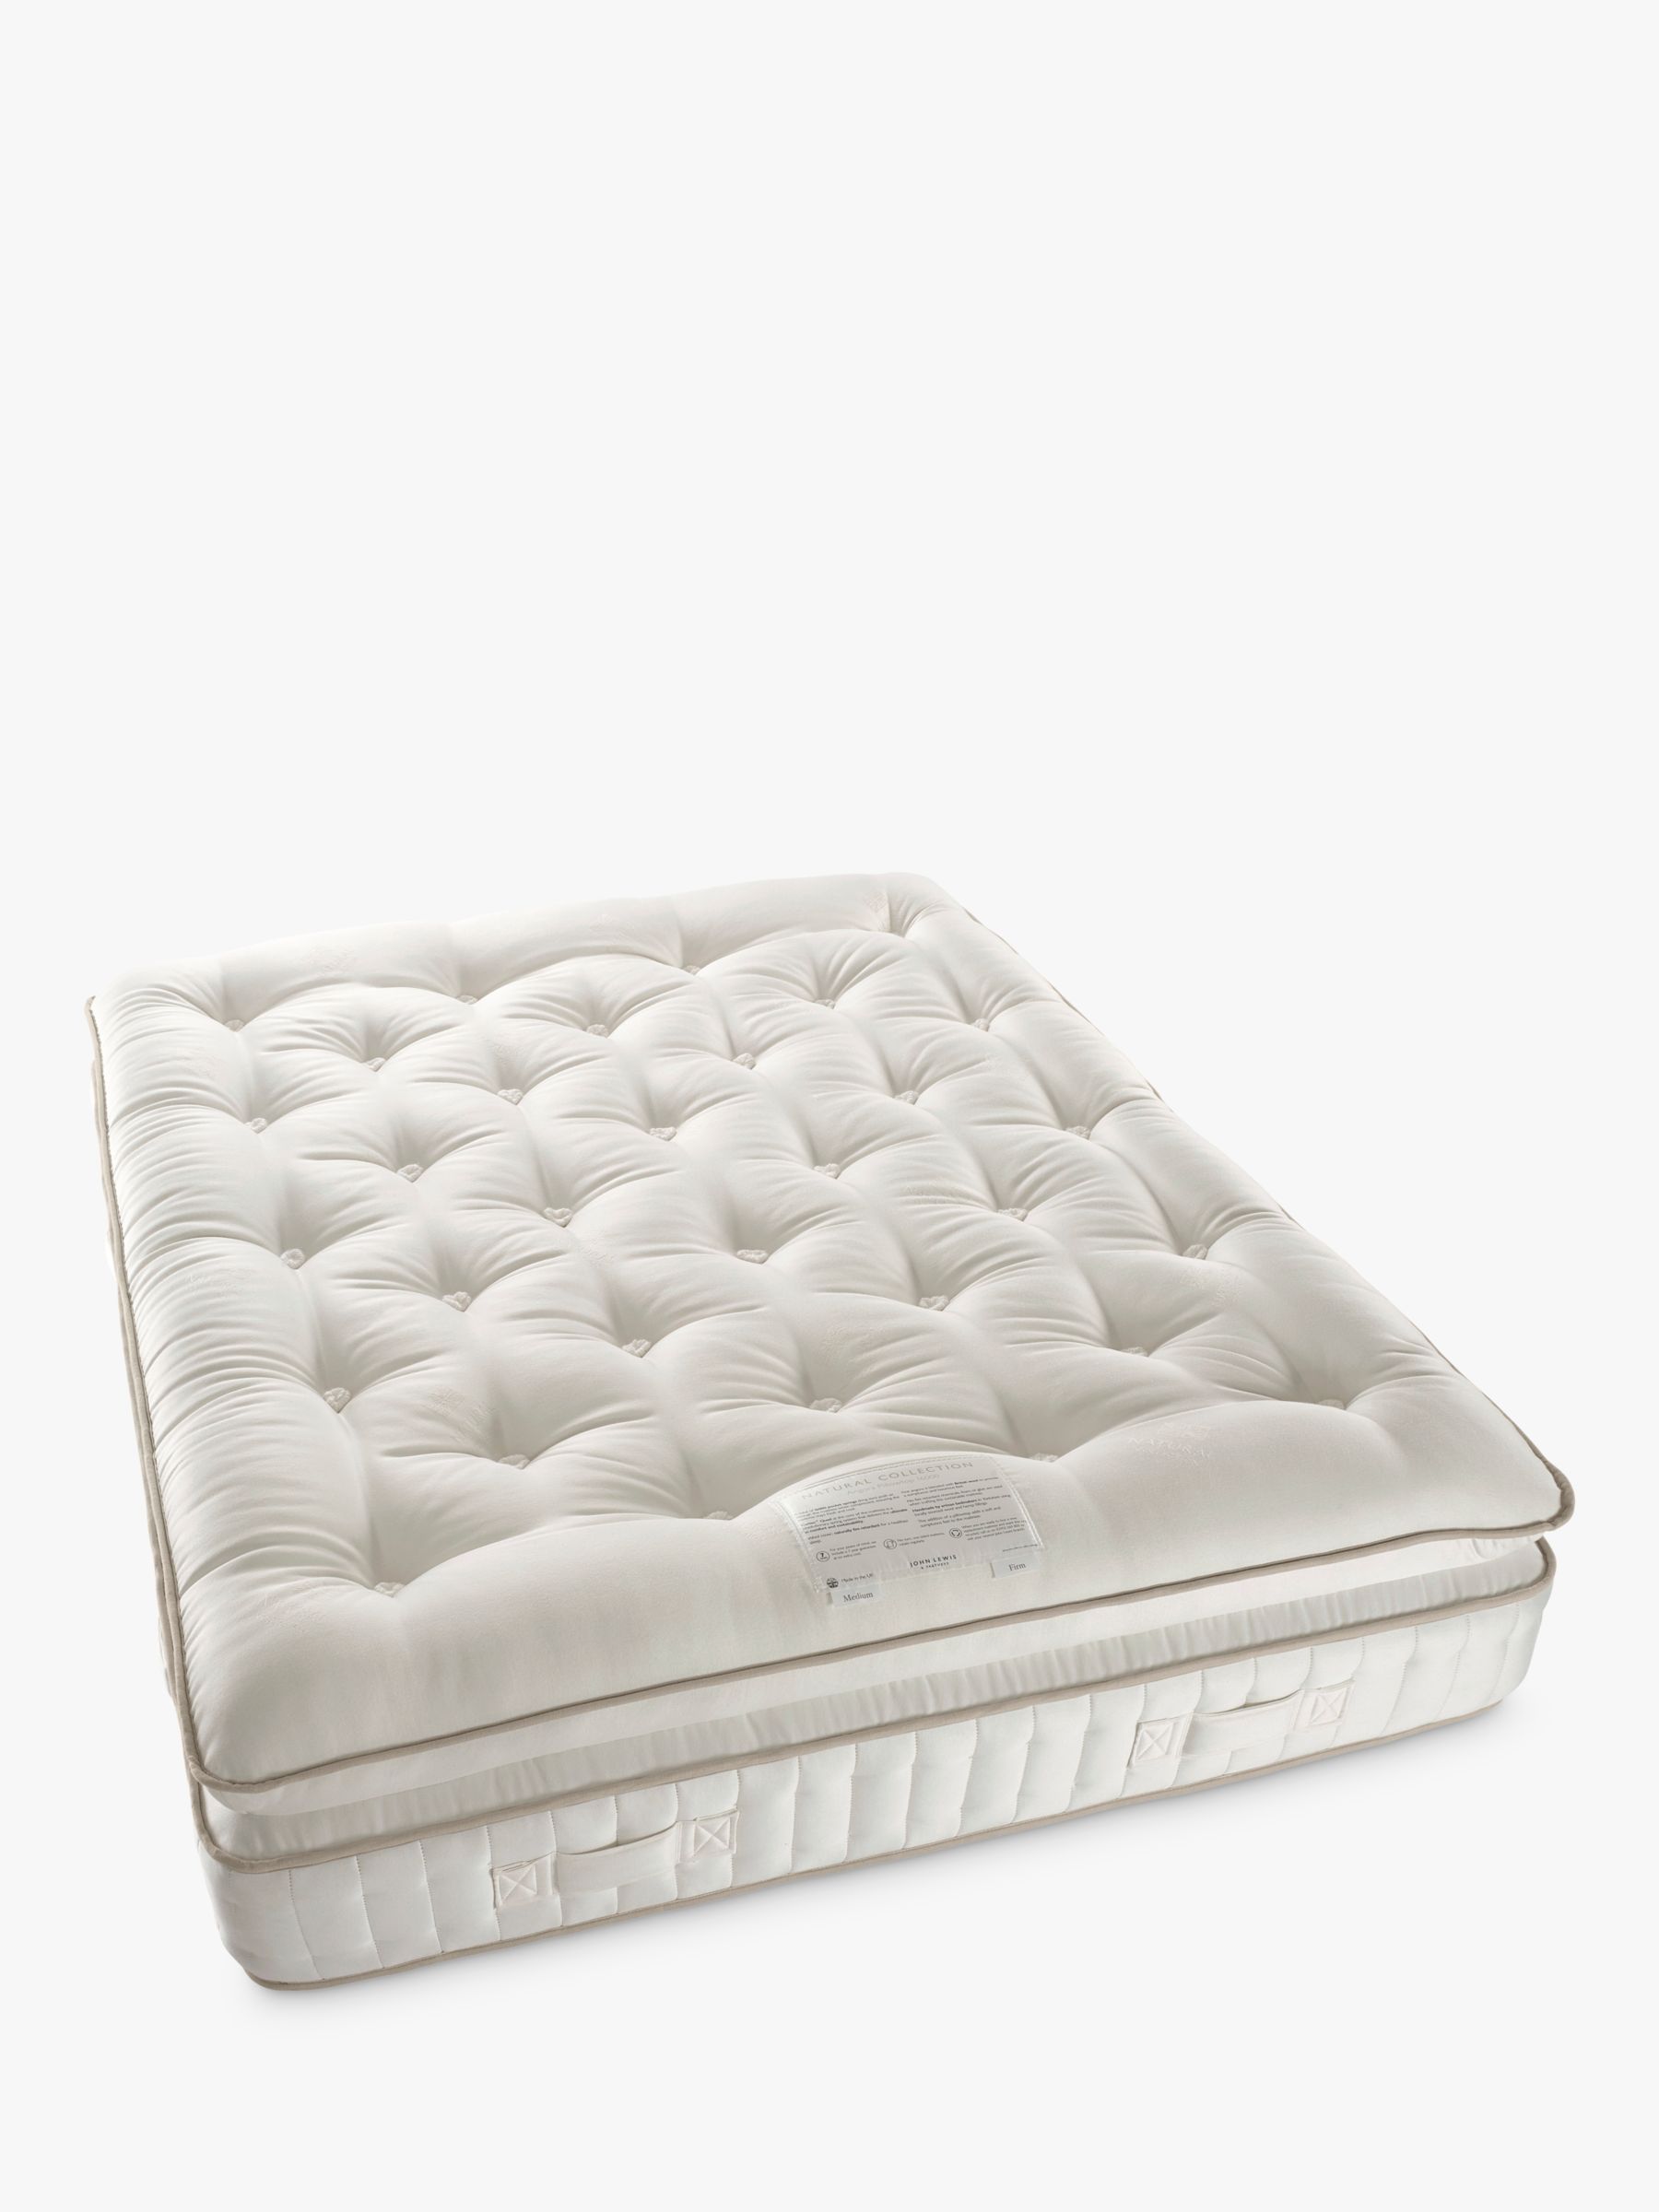 Photo of John lewis luxury natural collection mohair pillowtop 16000 small double regular tension pocket spring mattress